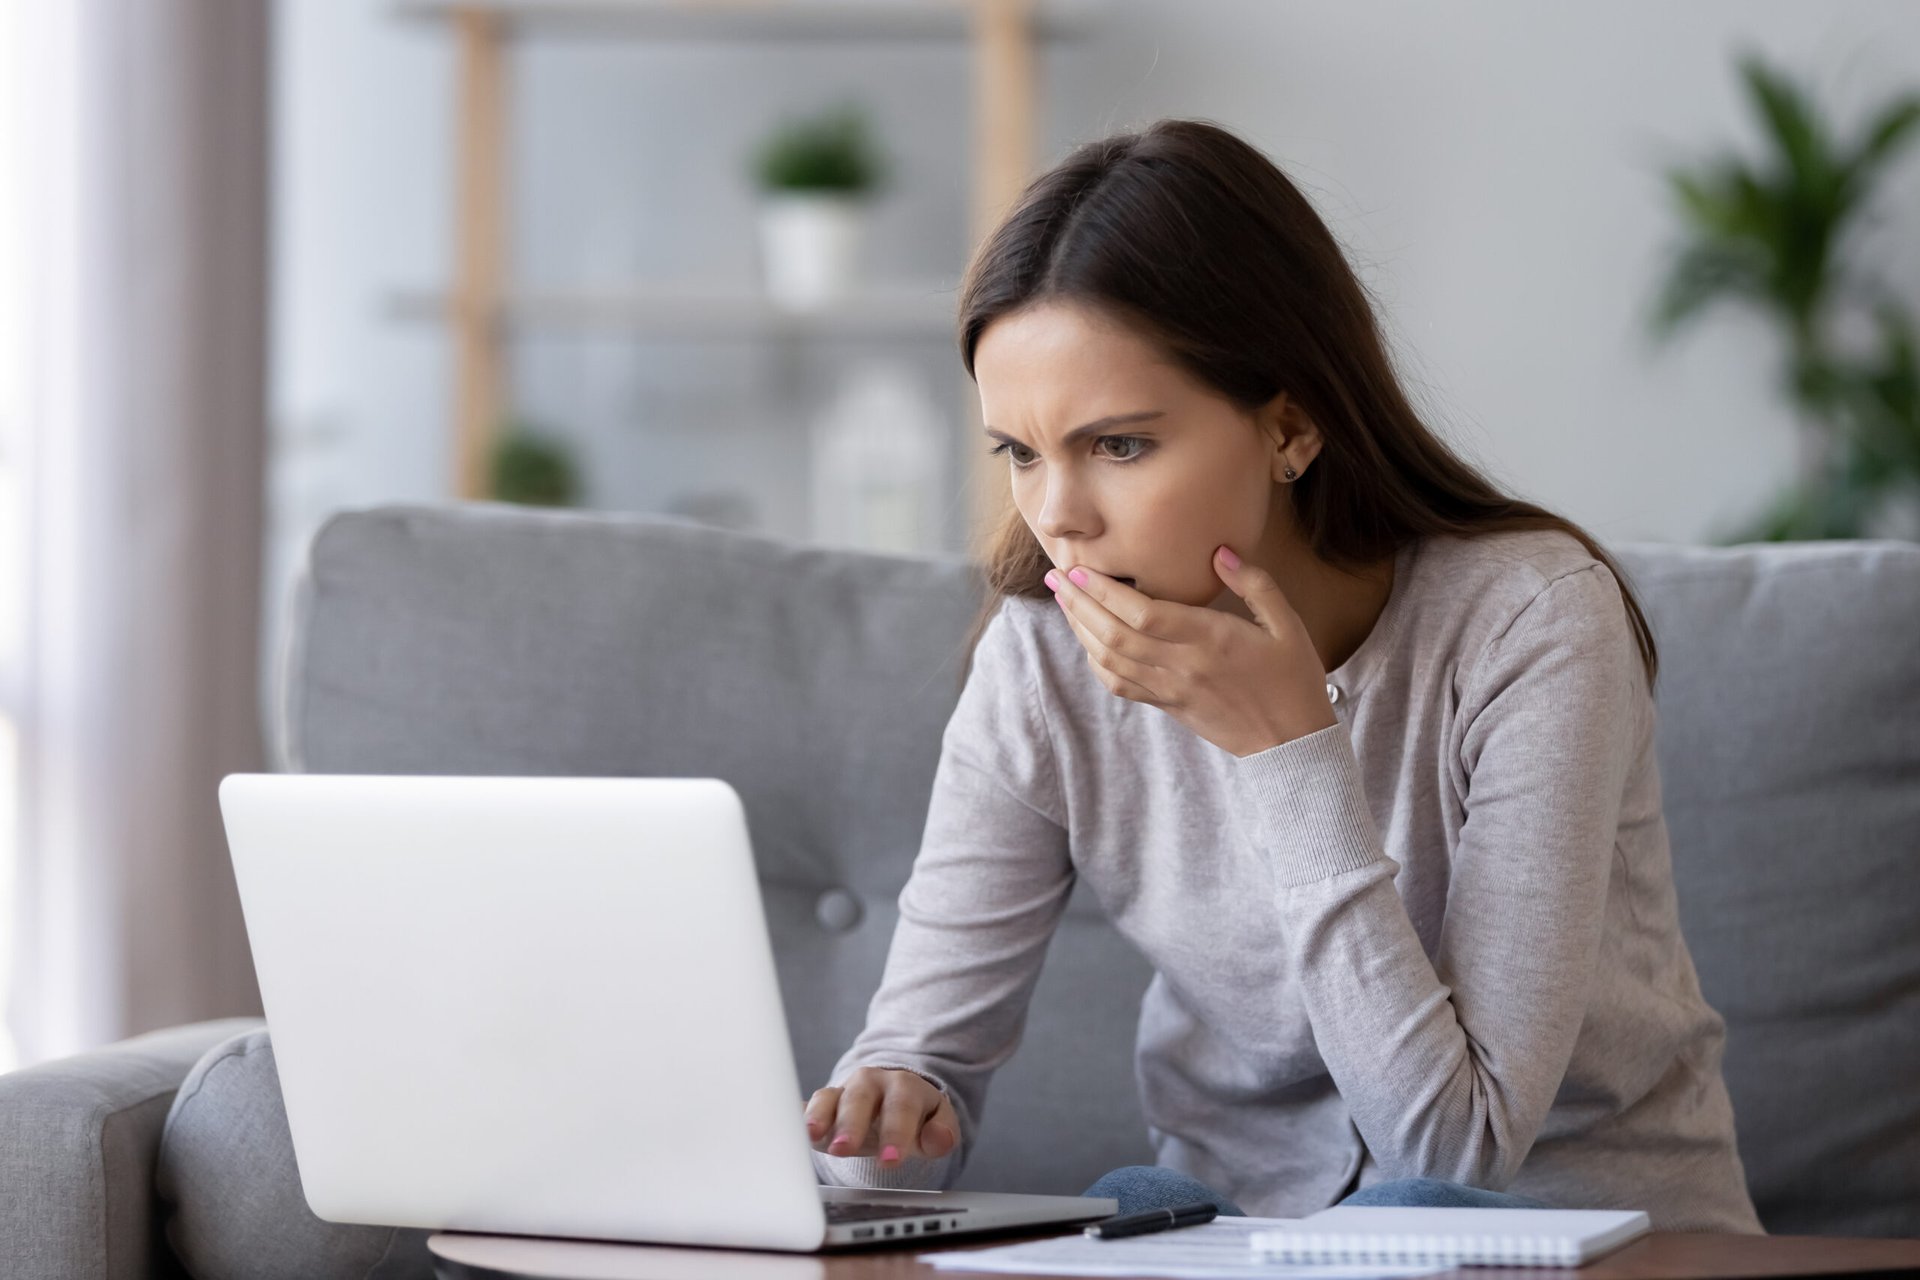 Woman shocked by something she's reading online